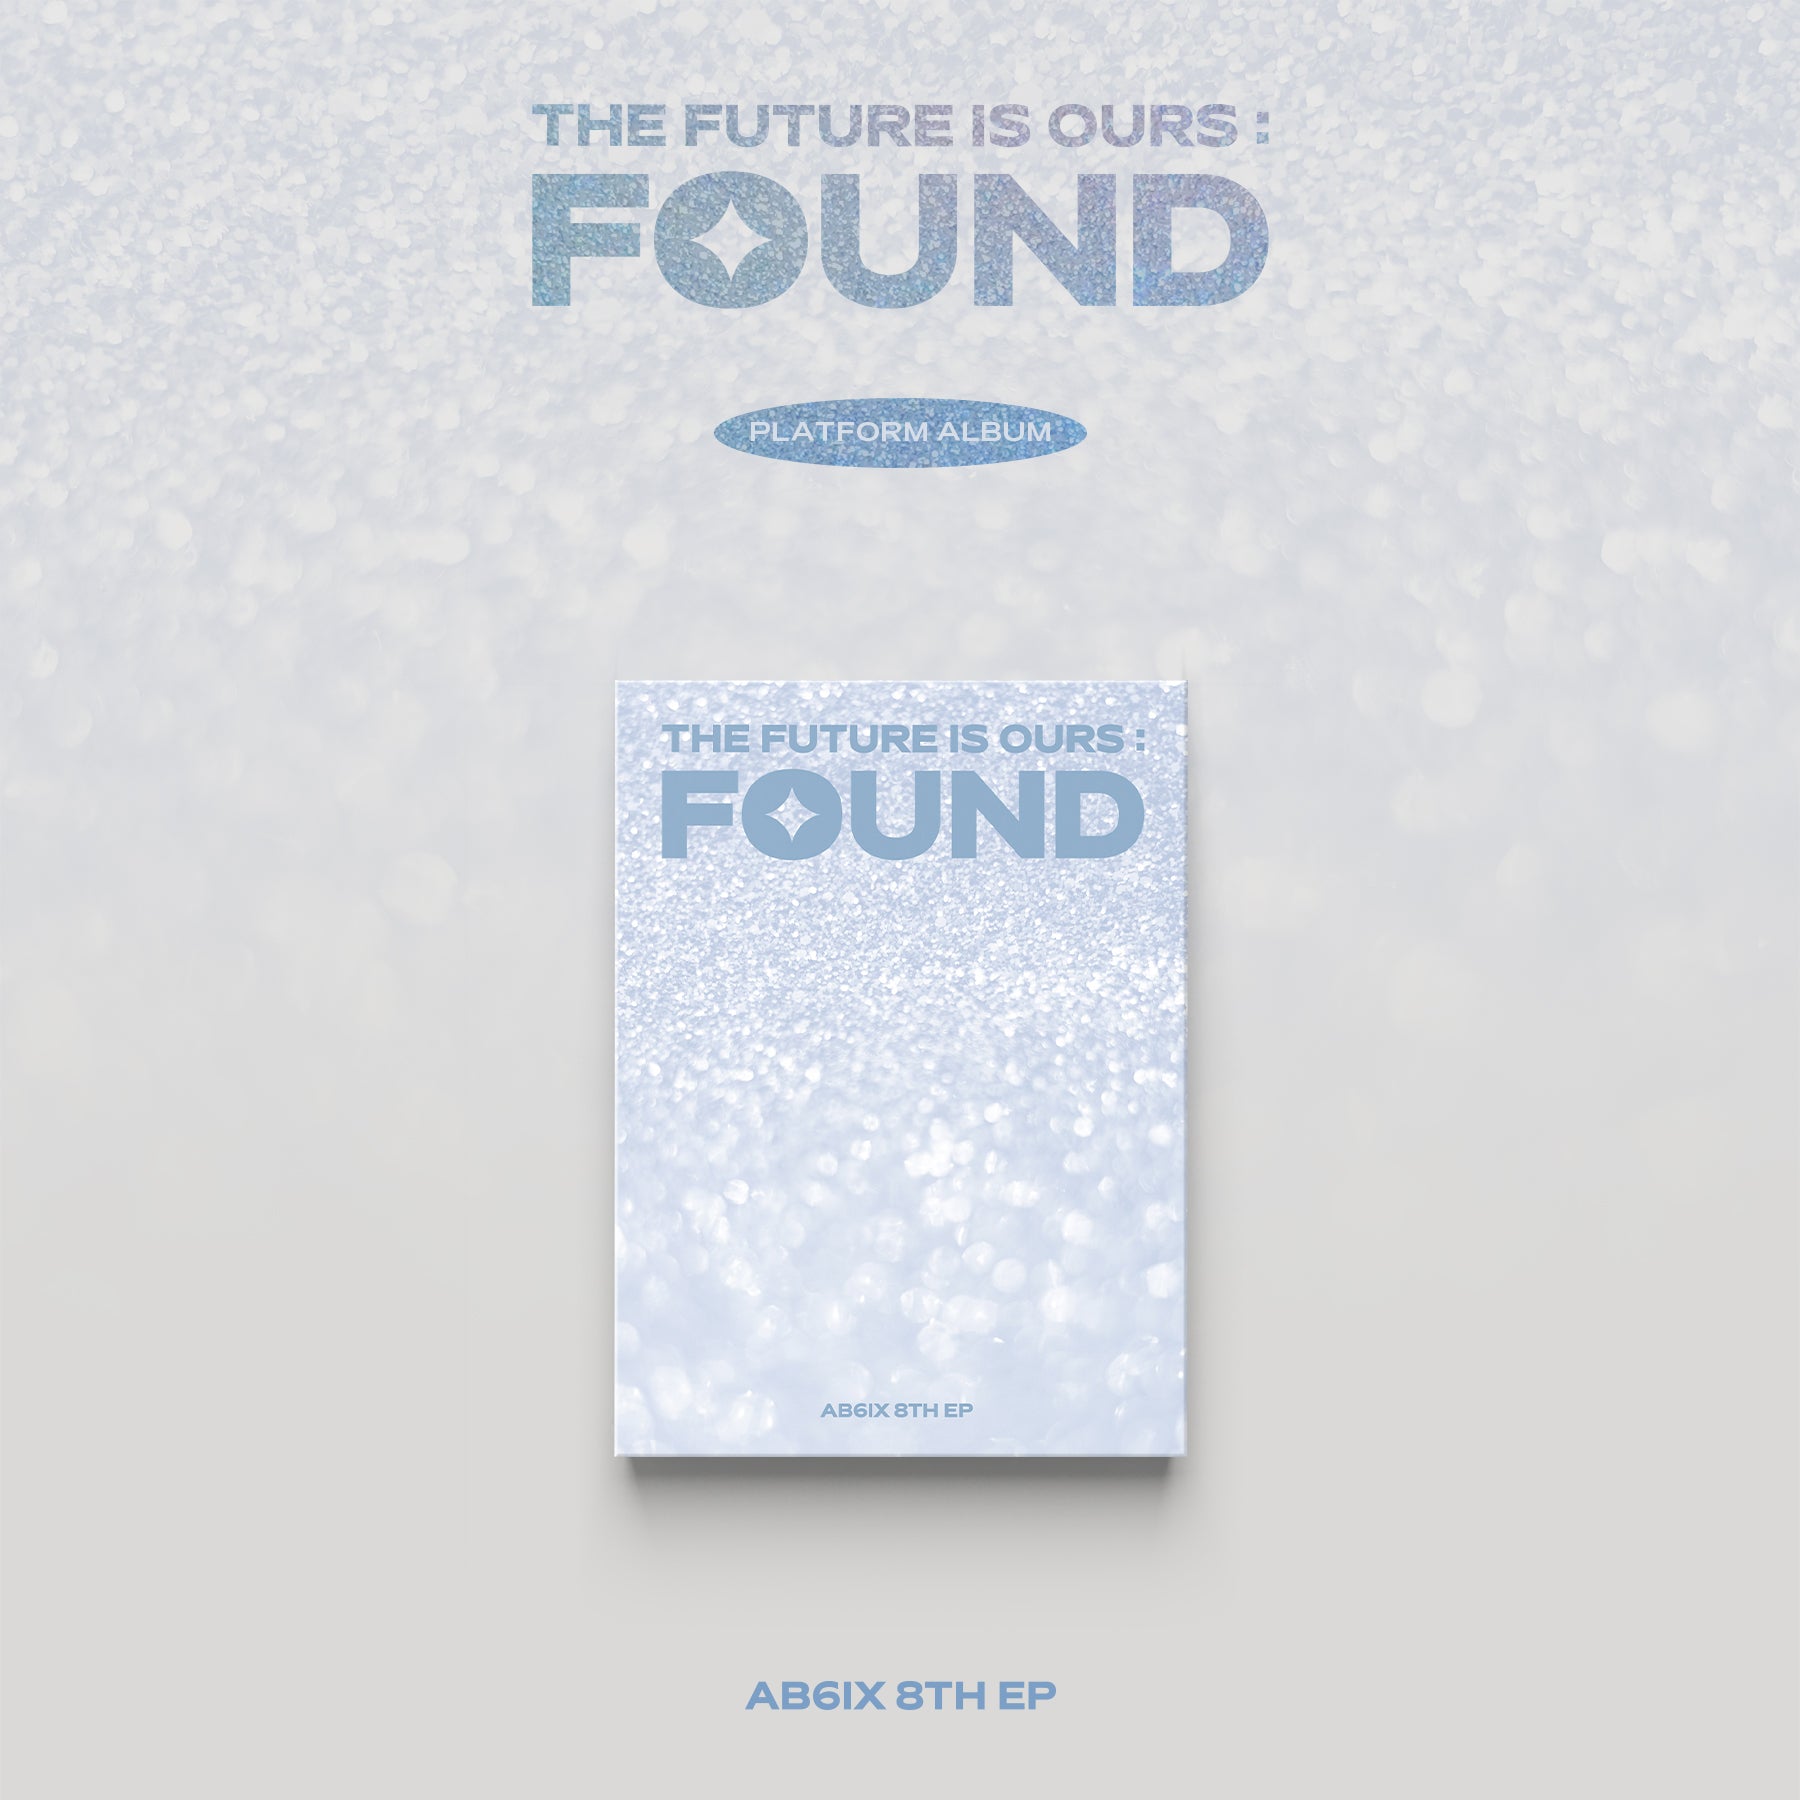 AB6IX - 8th EP THE FUTURE IS OURS : FOUND (Platform ver.)